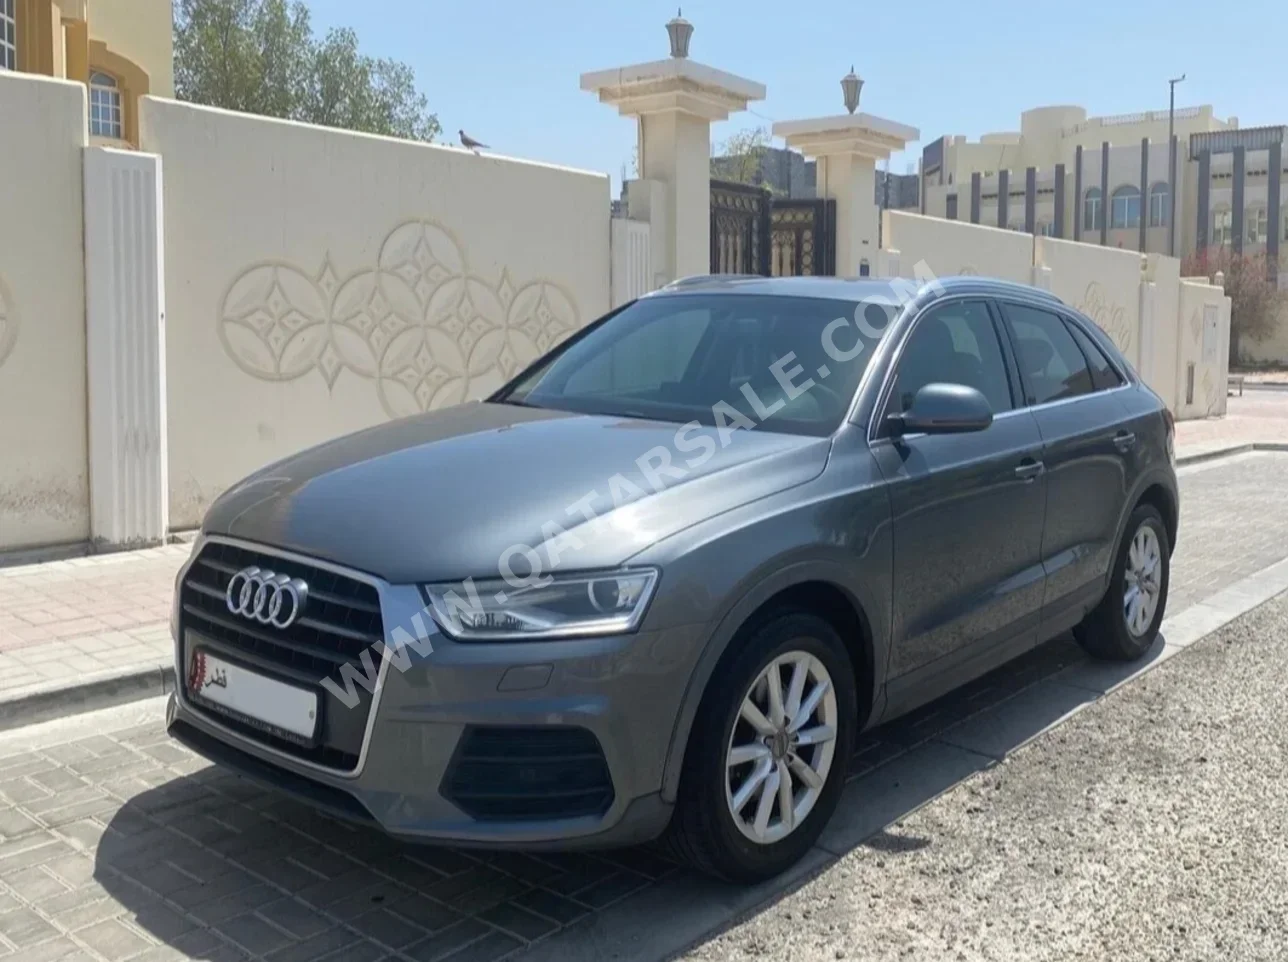 Audi  Q3  3.0 TFSI  2016  Automatic  117,000 Km  4 Cylinder  Front Wheel Drive (FWD)  SUV  Silver